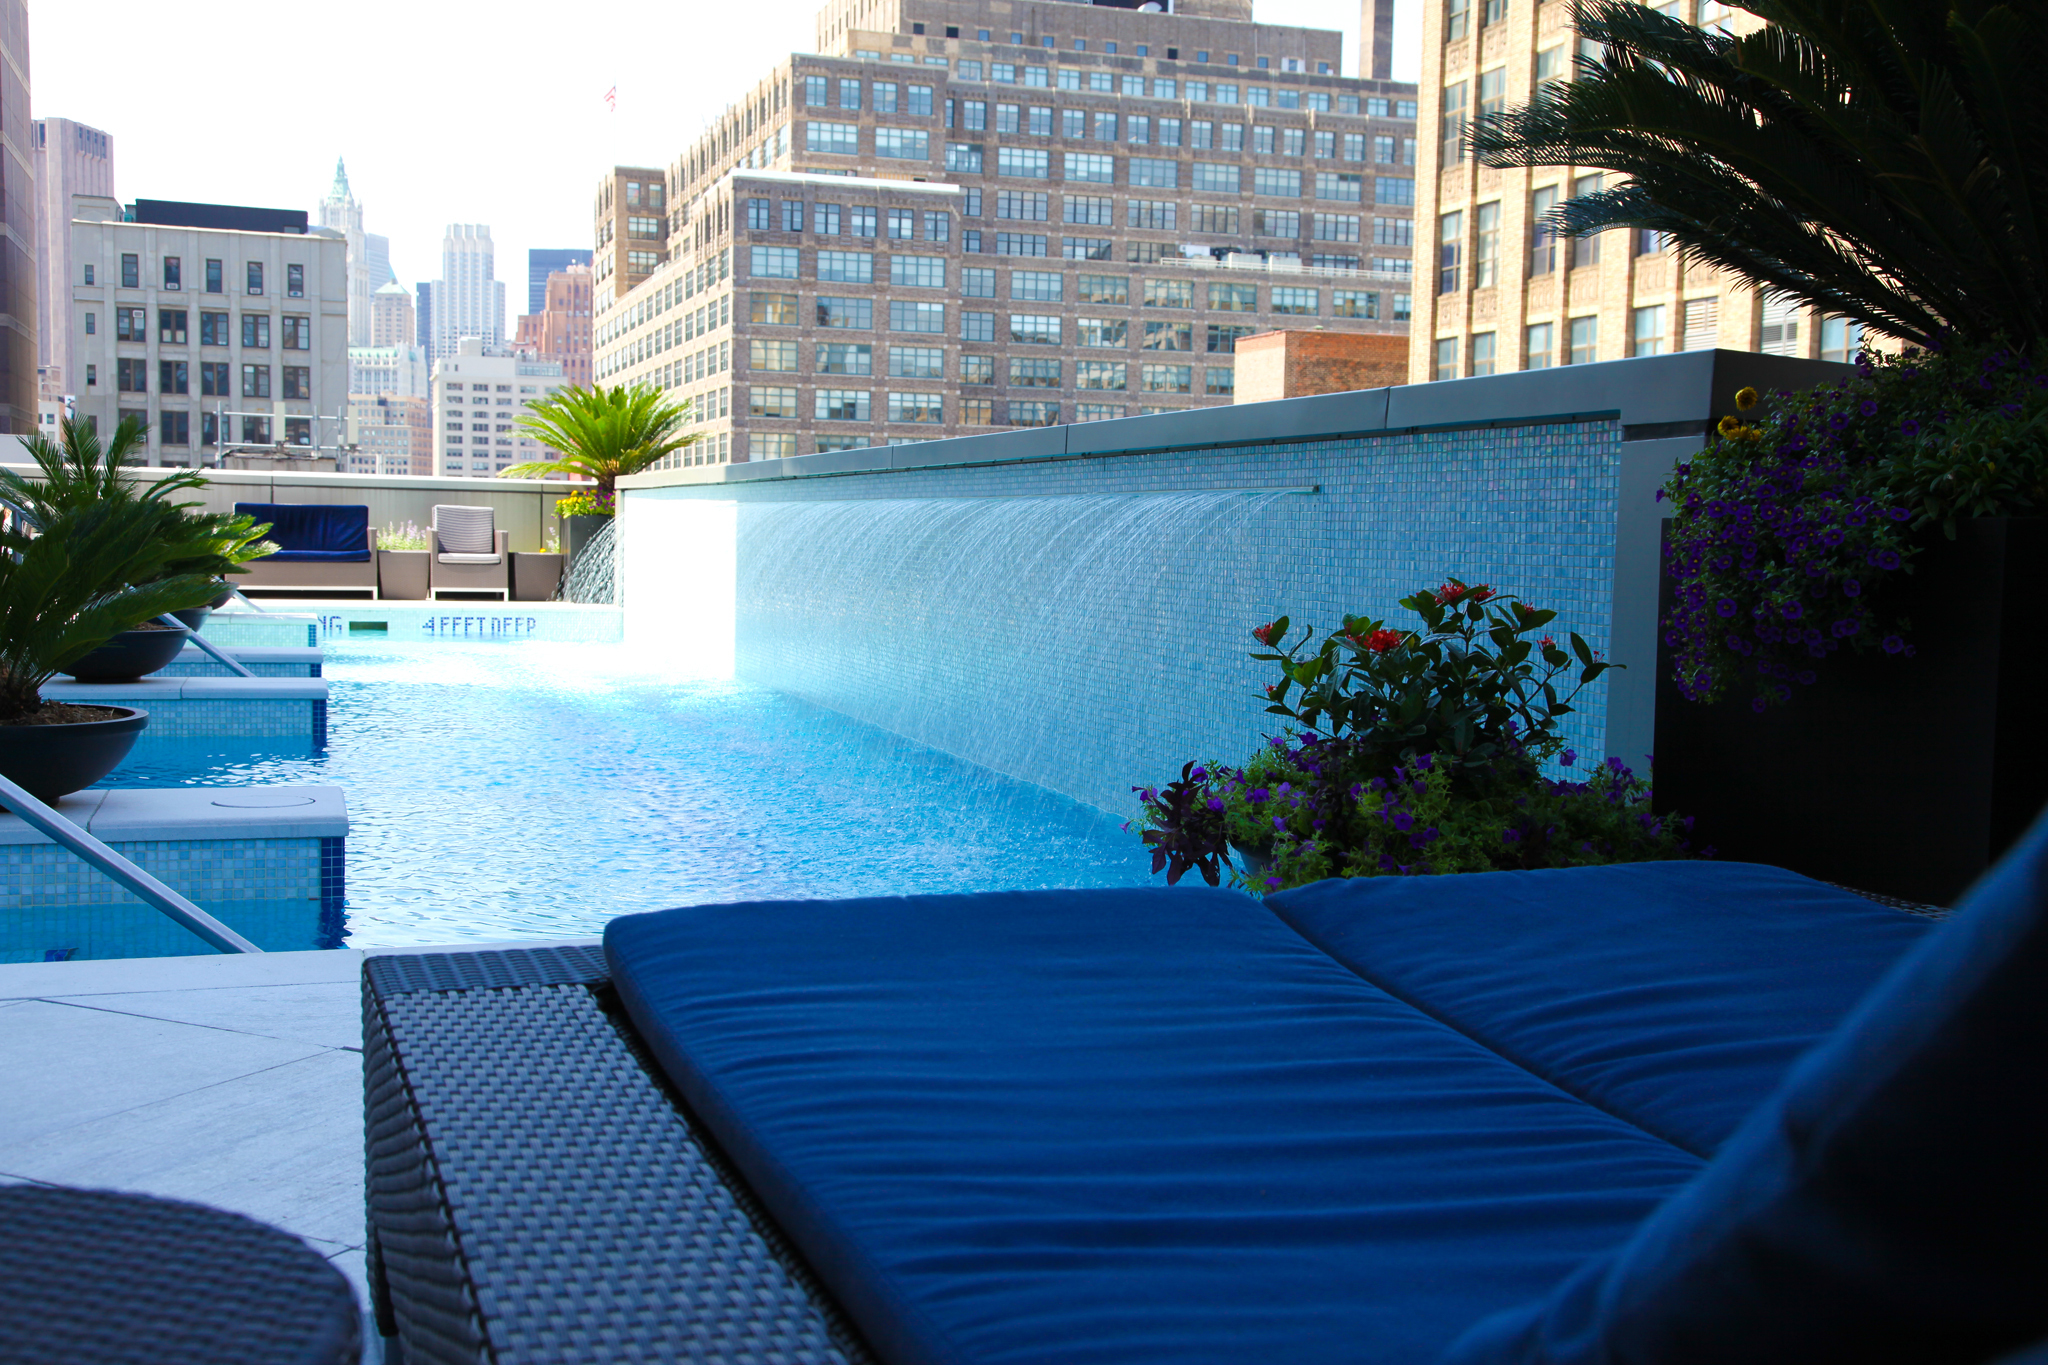 Rooftop pools at NYC hotels open to the public in NYC